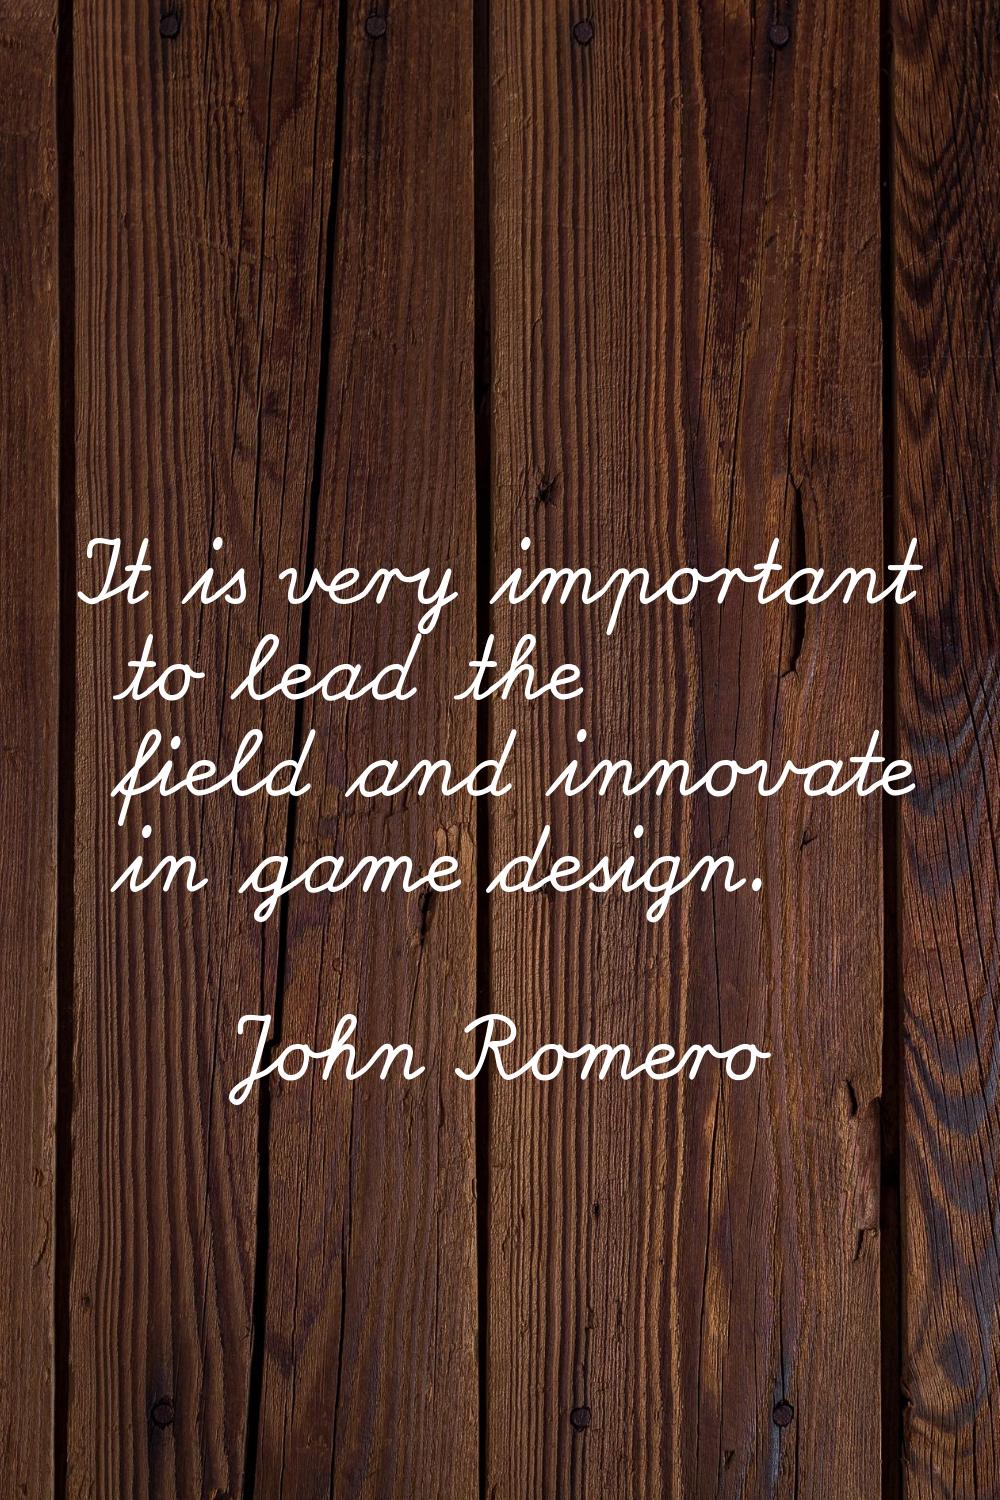 It is very important to lead the field and innovate in game design.